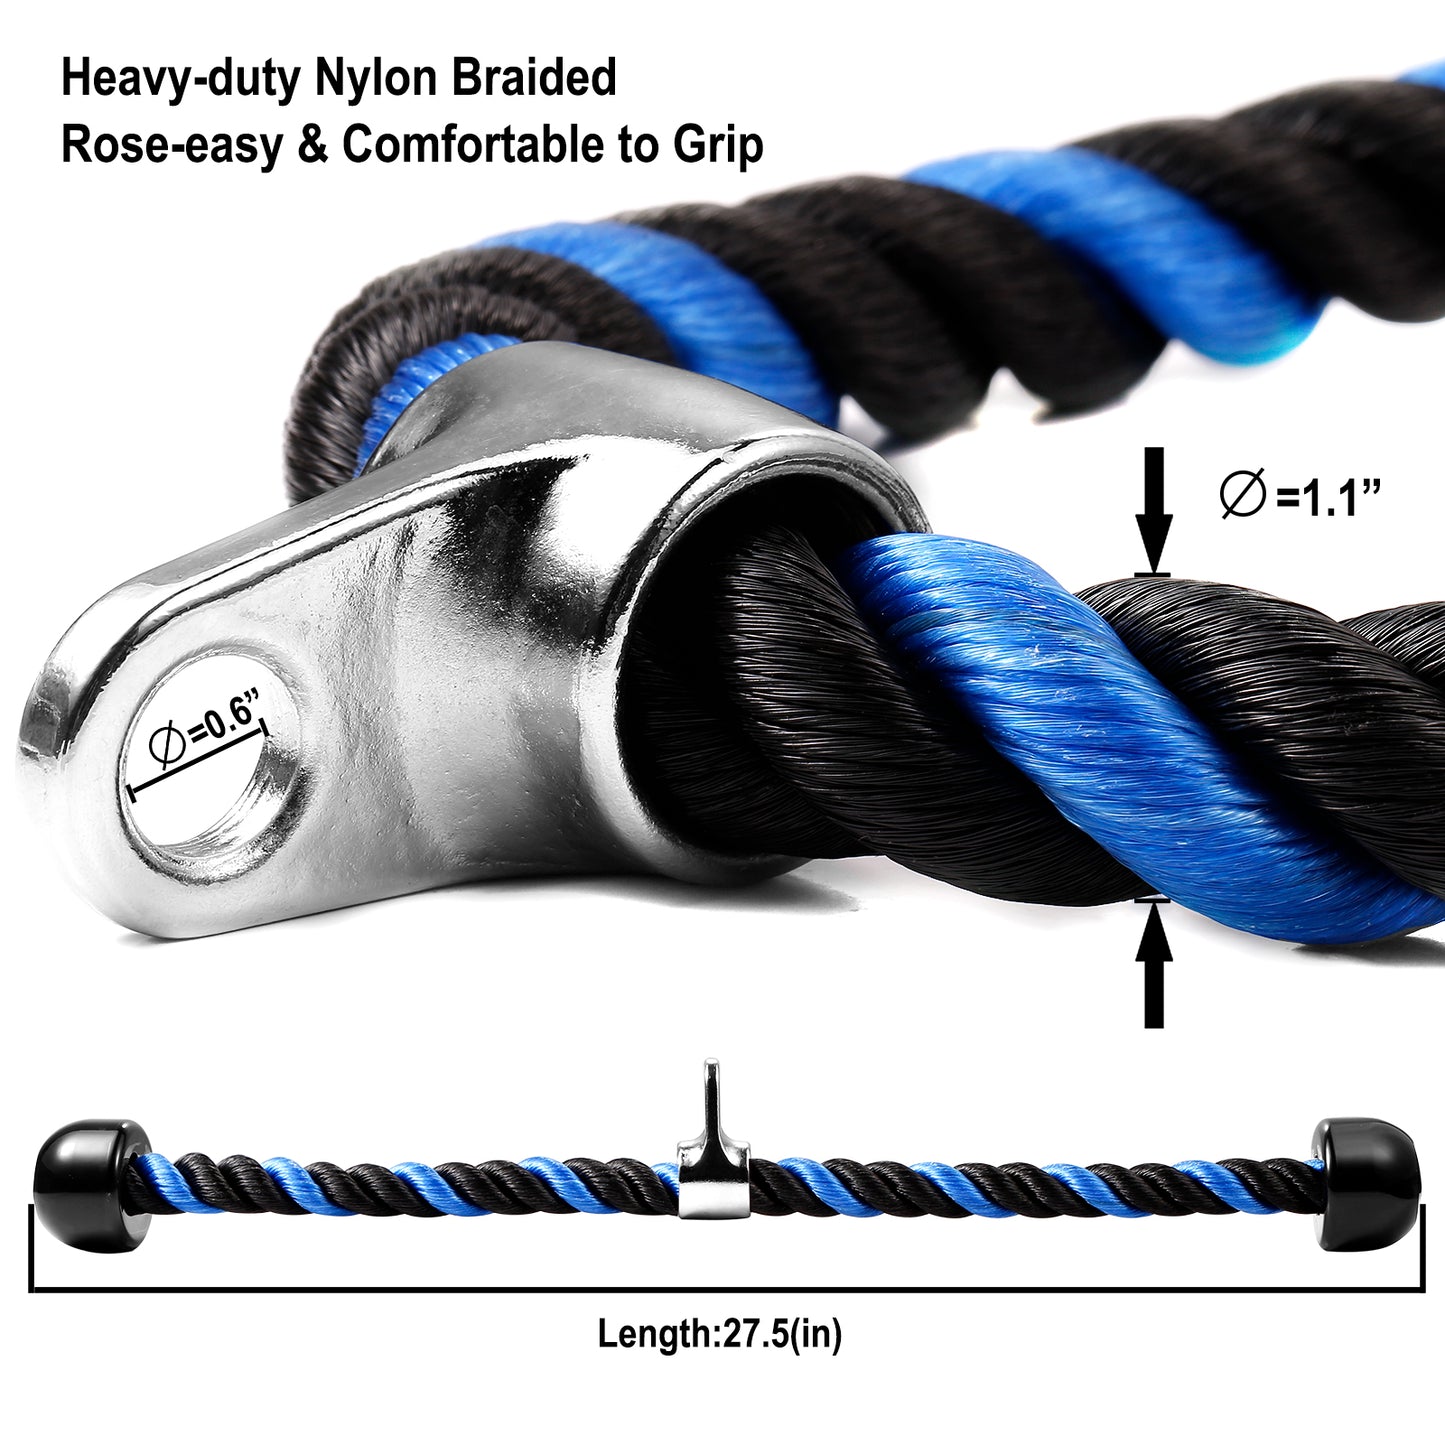 Awefrank Deluxe Tricep Rope Pull Down Cable, 27 Inch Rope Length, Easy to Grip & Non-Slip Cable Attachment for Gym Workout Exercise